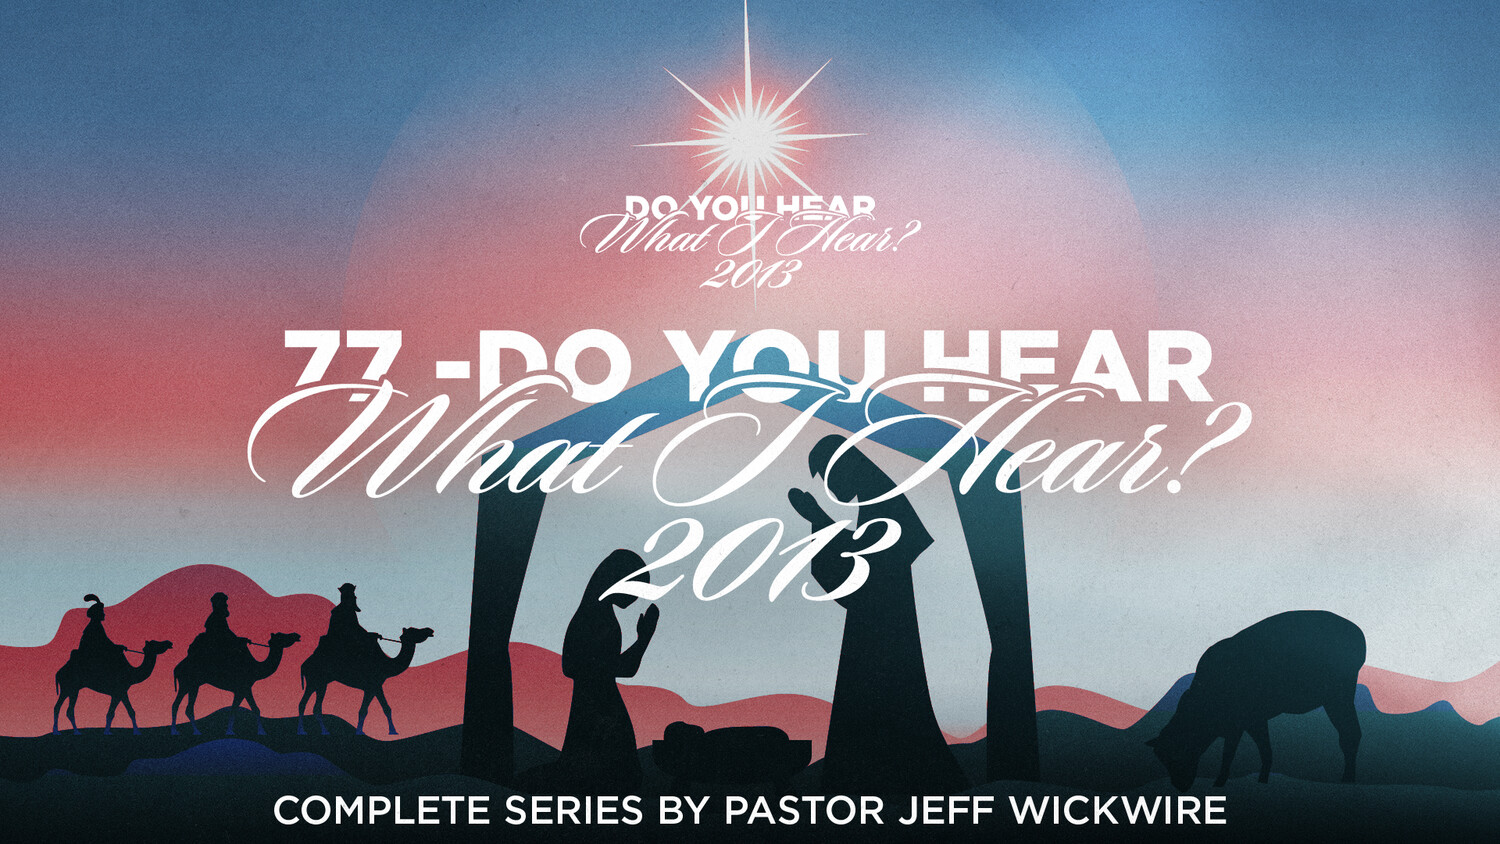 77 - Do You Hear What I Hear? 2013 - Complete Series By Pastor Jeff Wickwire